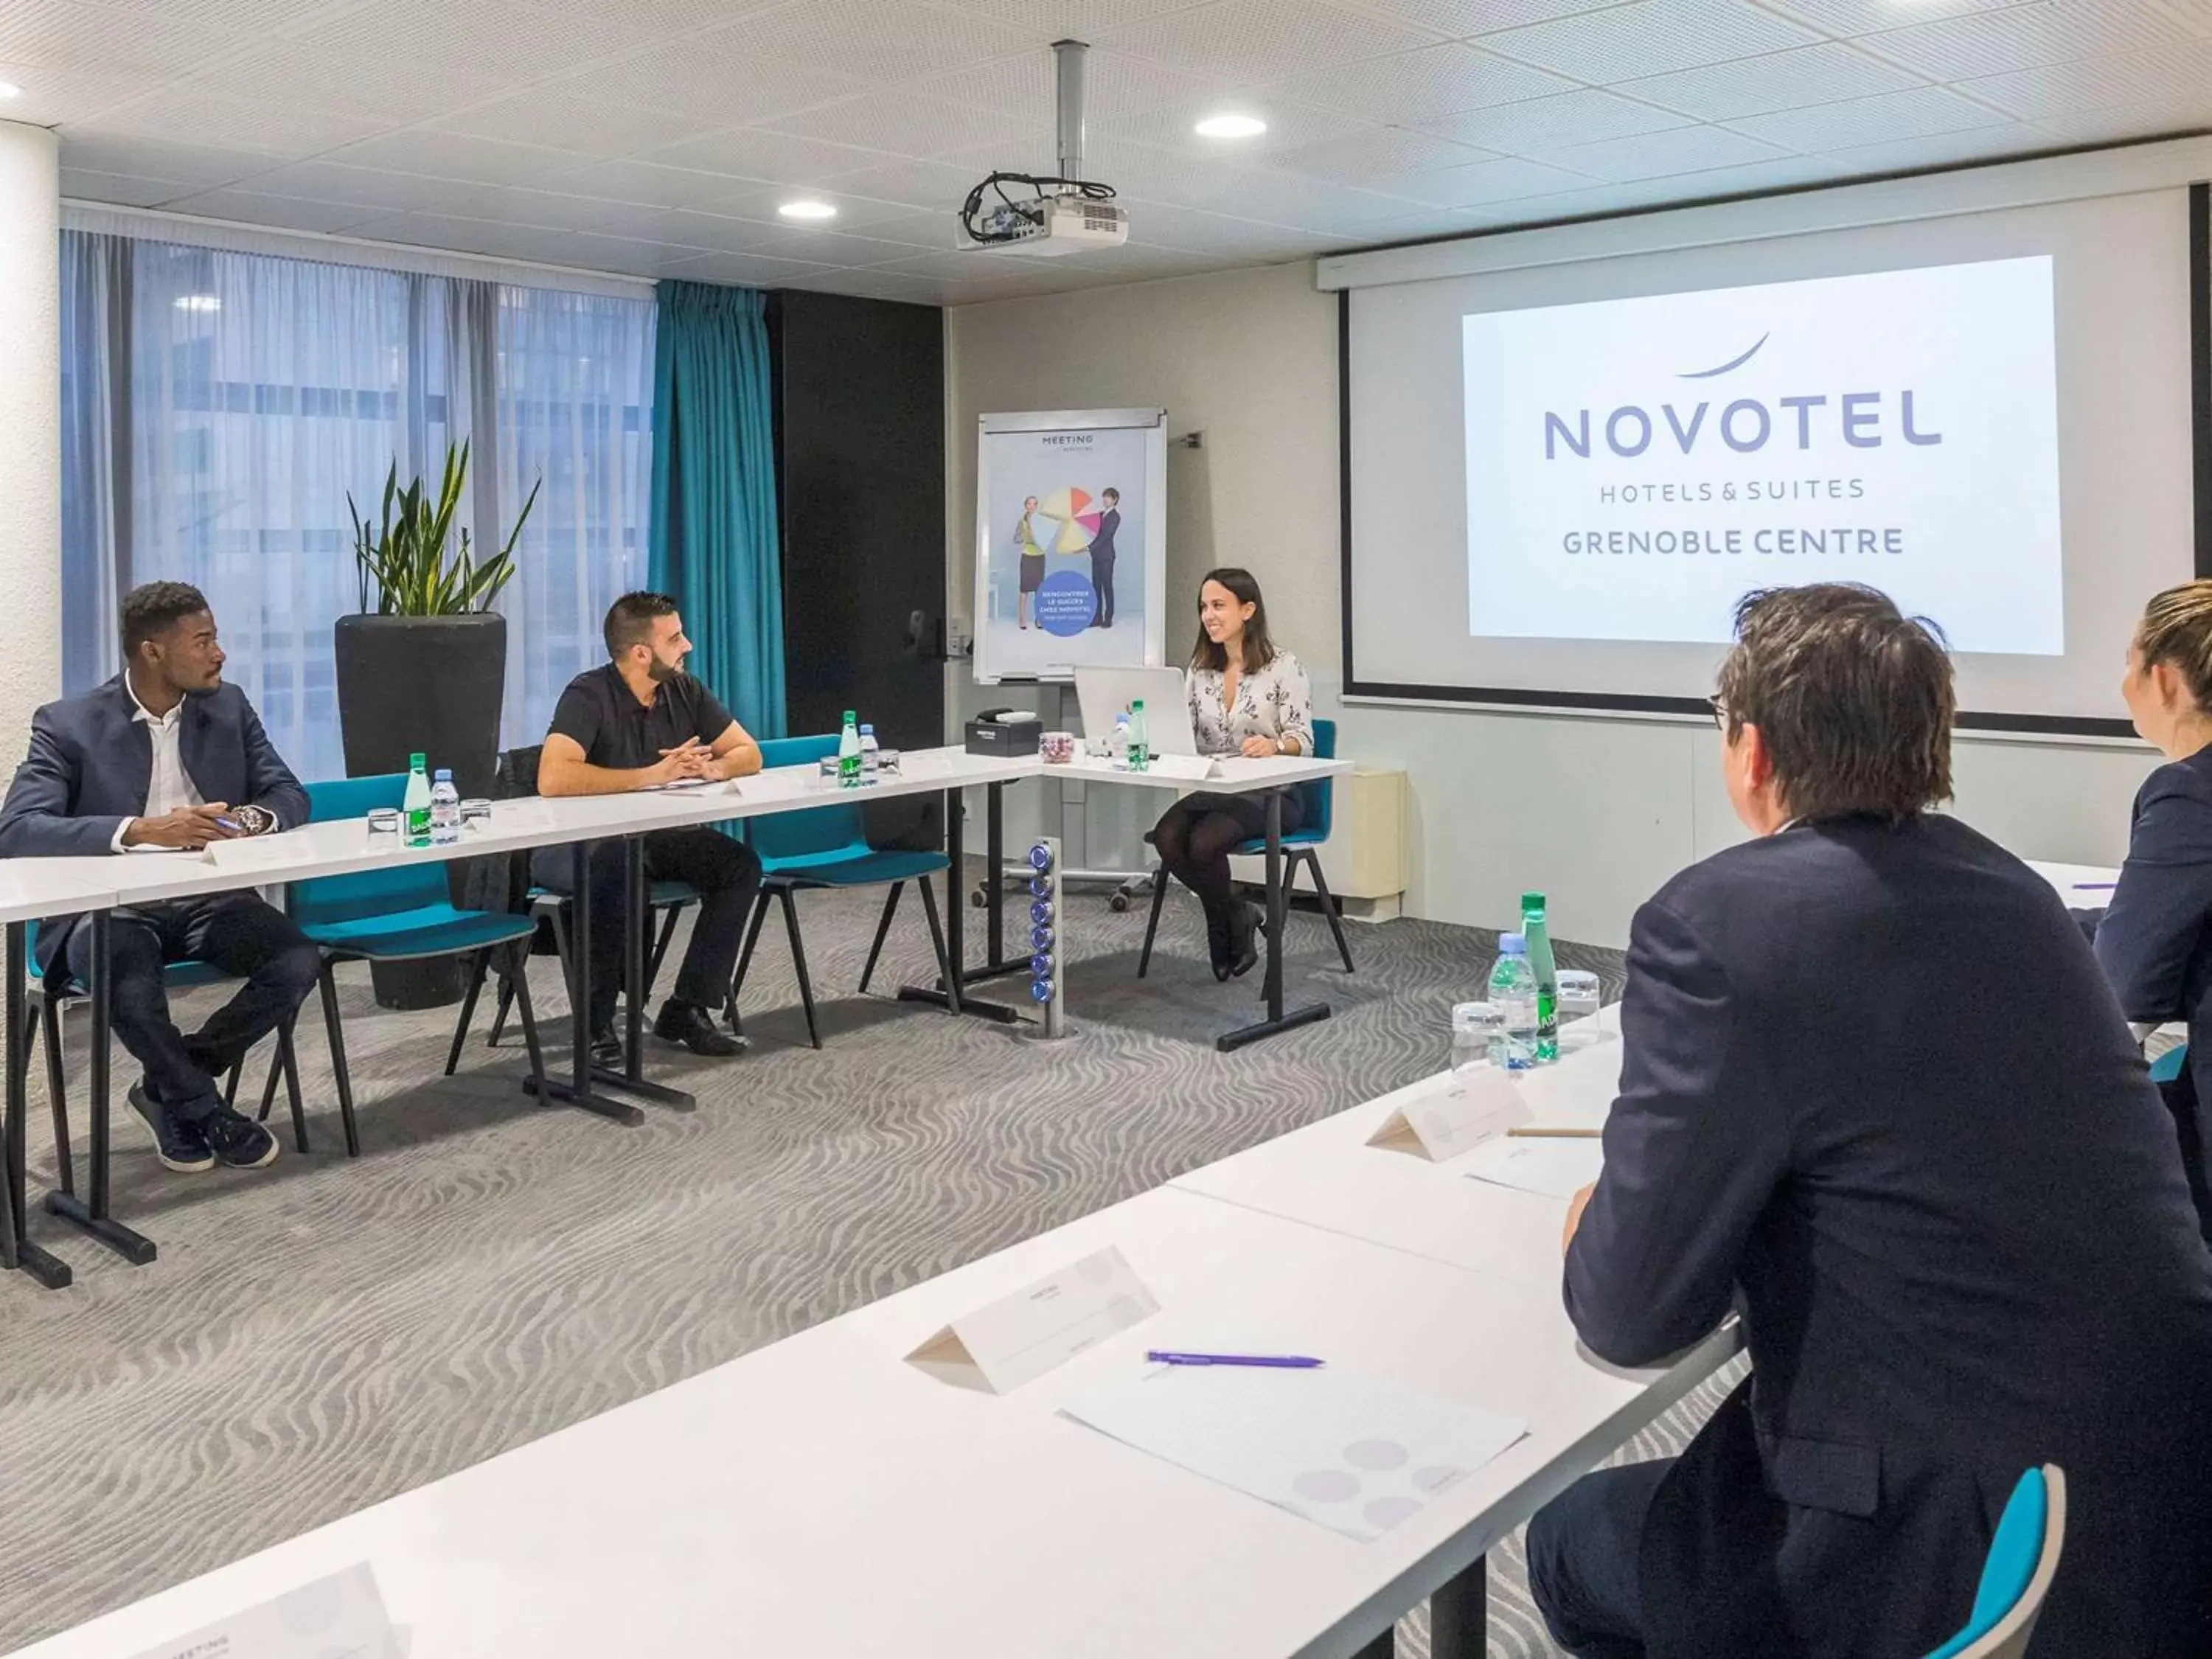 On site, Business Area/Conference Room in Novotel Grenoble Centre